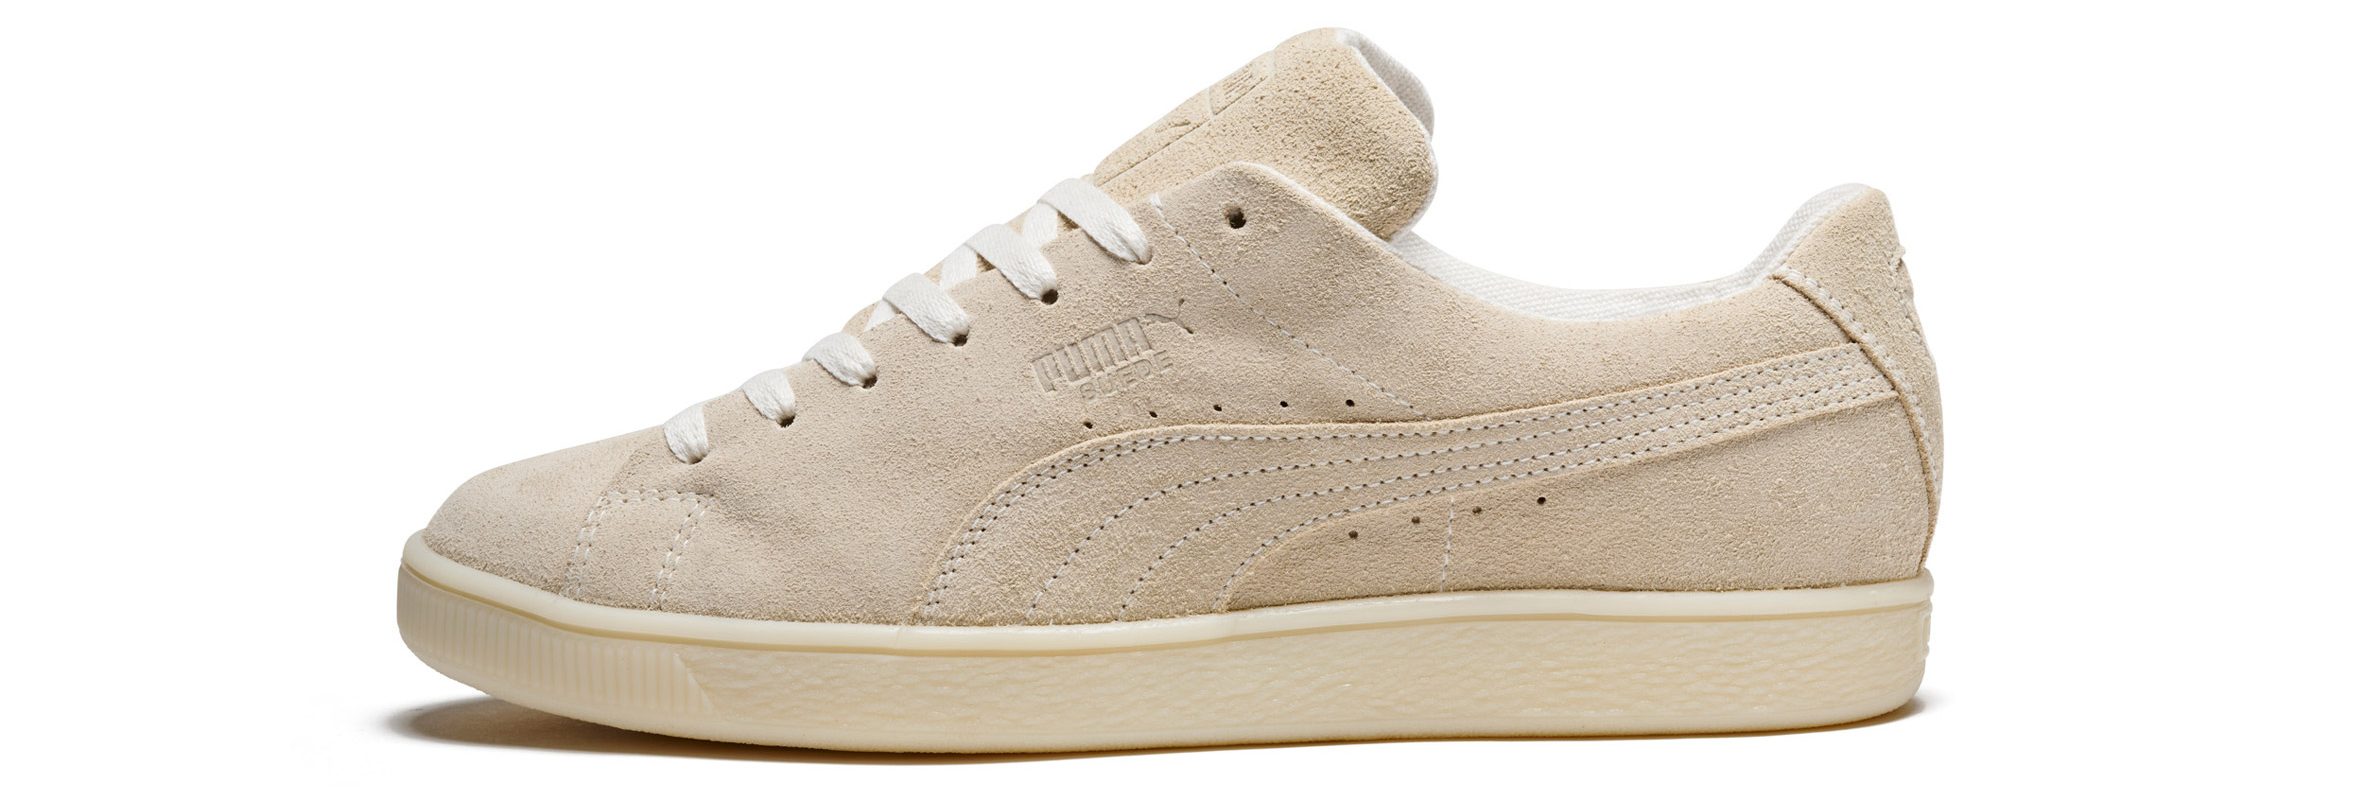 Photo of Puma's Re:Suede biodegradable sneaker showing a cream-coloured version of the common Suede sneaker